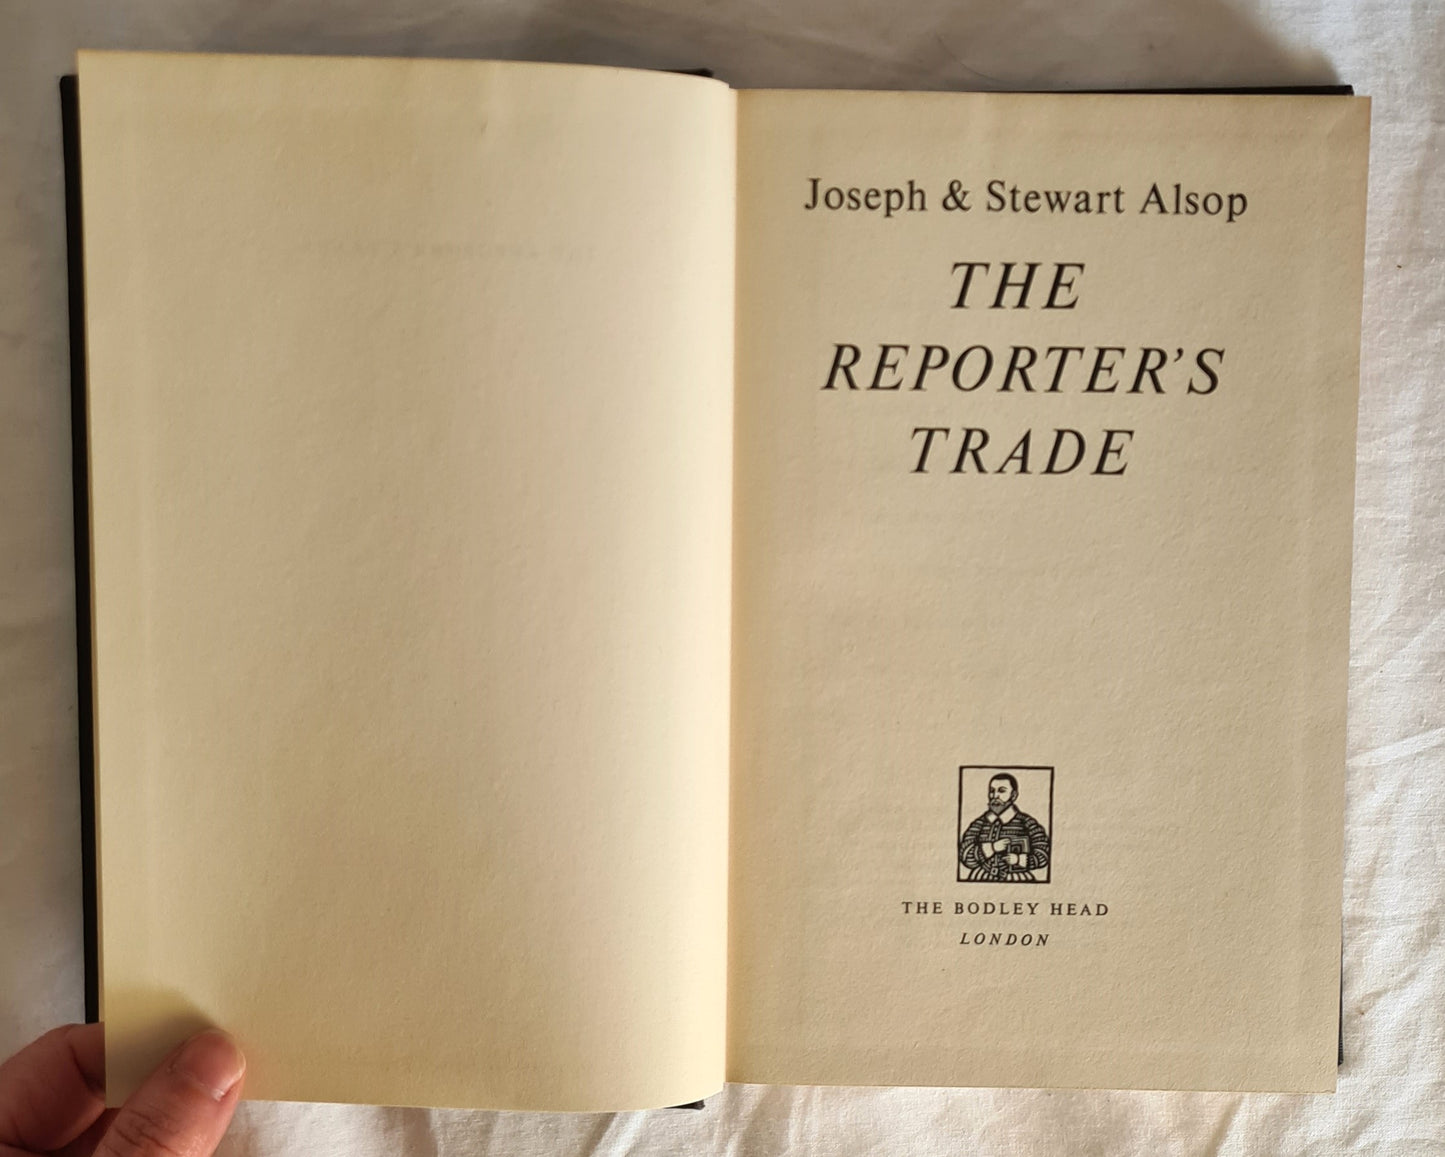 The Reporter’s Trade by Joseph and Stewart Alsop